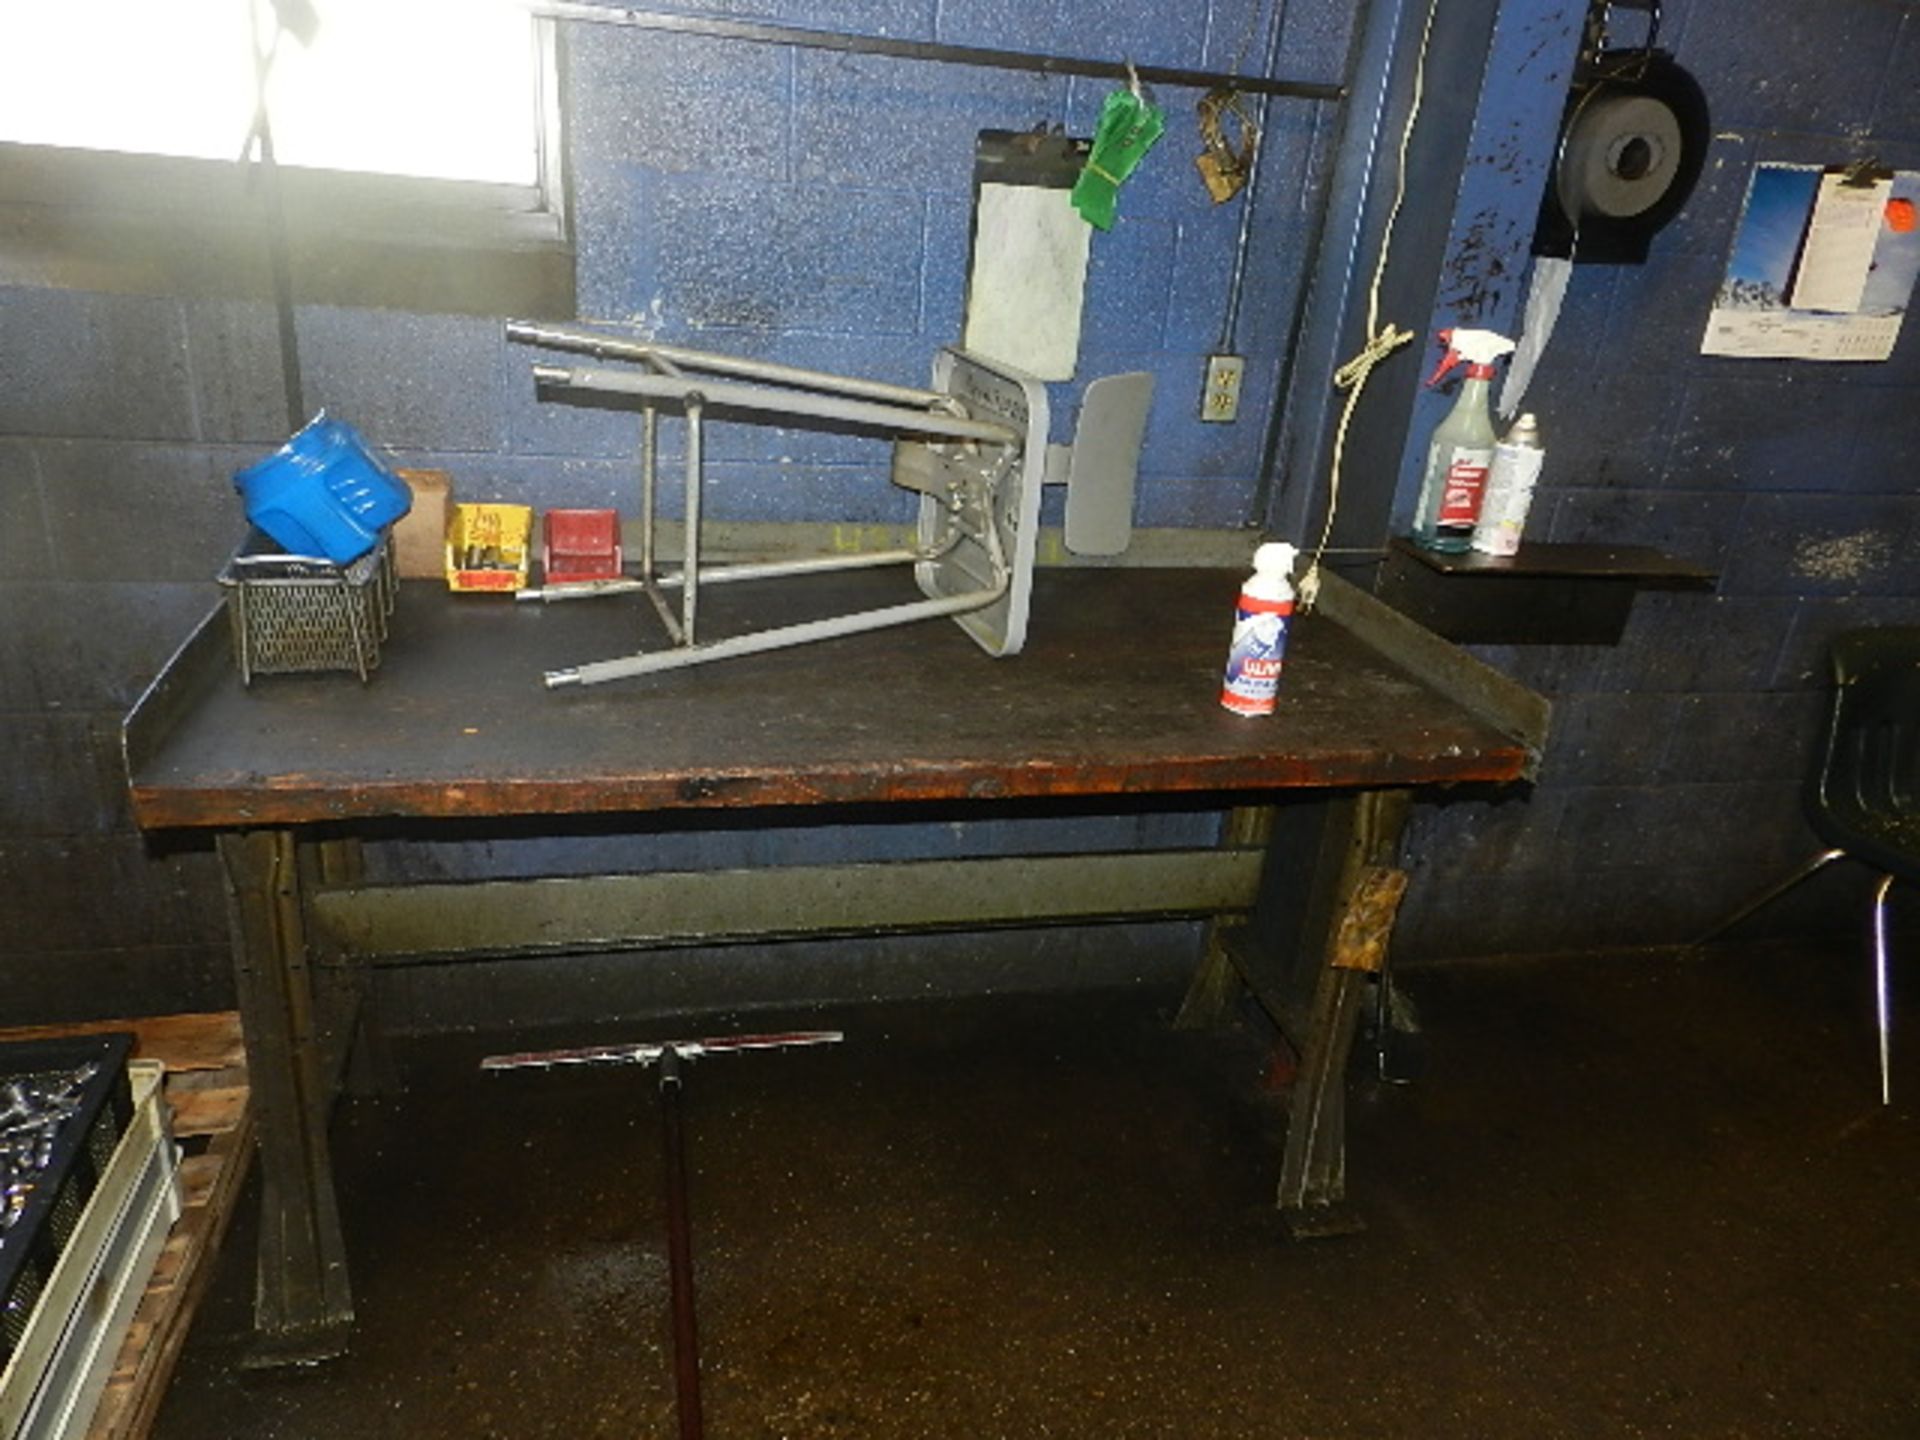 (1) 6' LONG WORK BENCH, (1) 5' LONG WORK BENCH, STOOL, AND CONTENTS ON TABLE (A) - Image 3 of 4